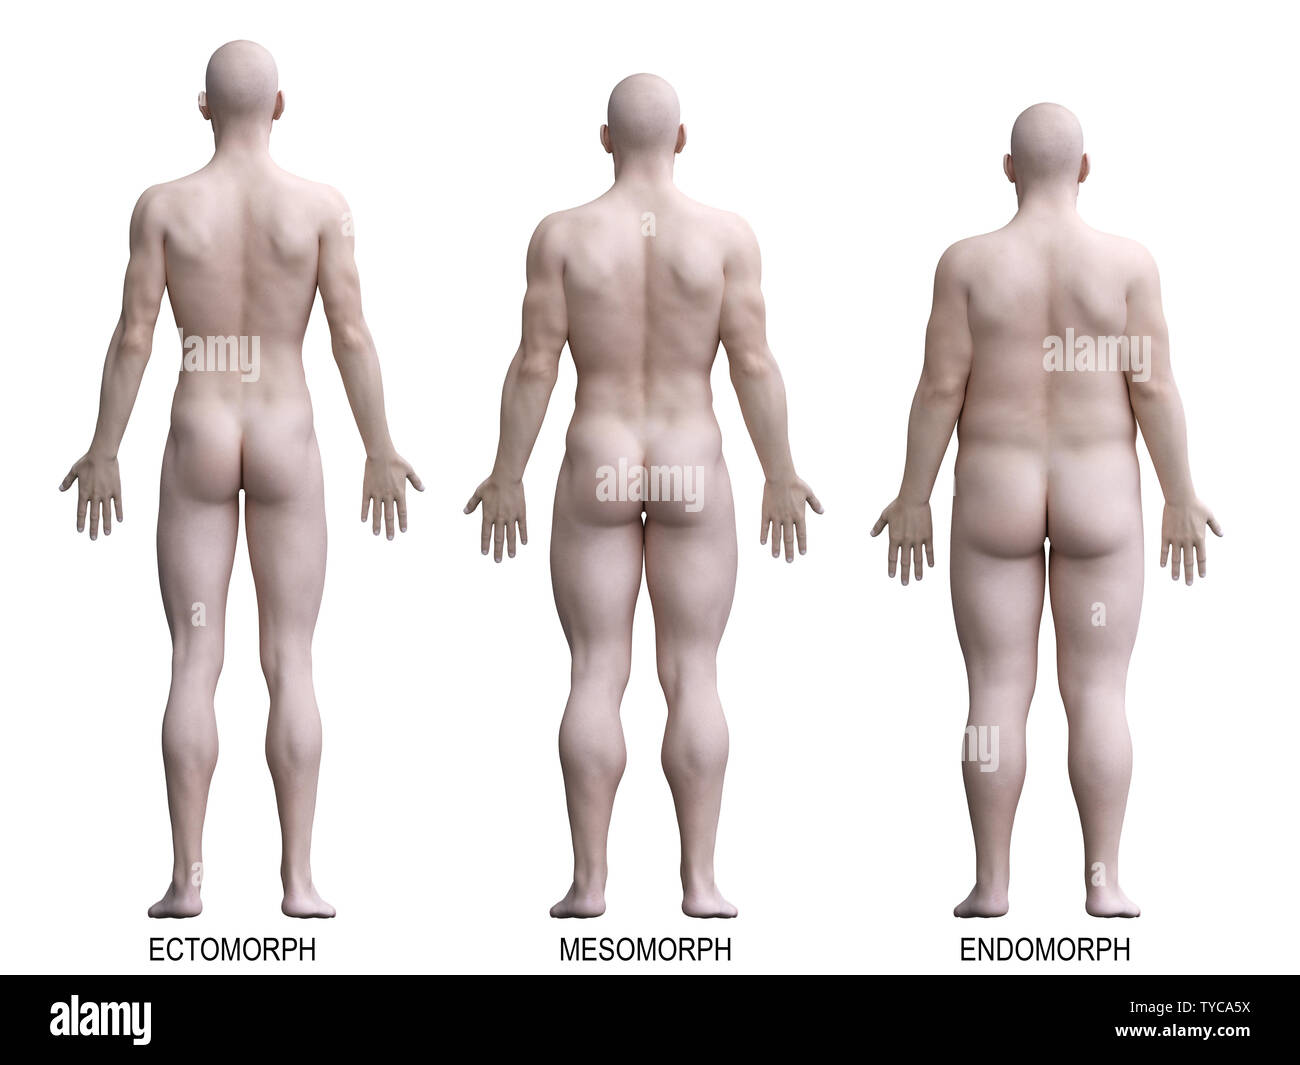 Male mesomorph body type, illustration - Stock Image - F038/5738 - Science  Photo Library